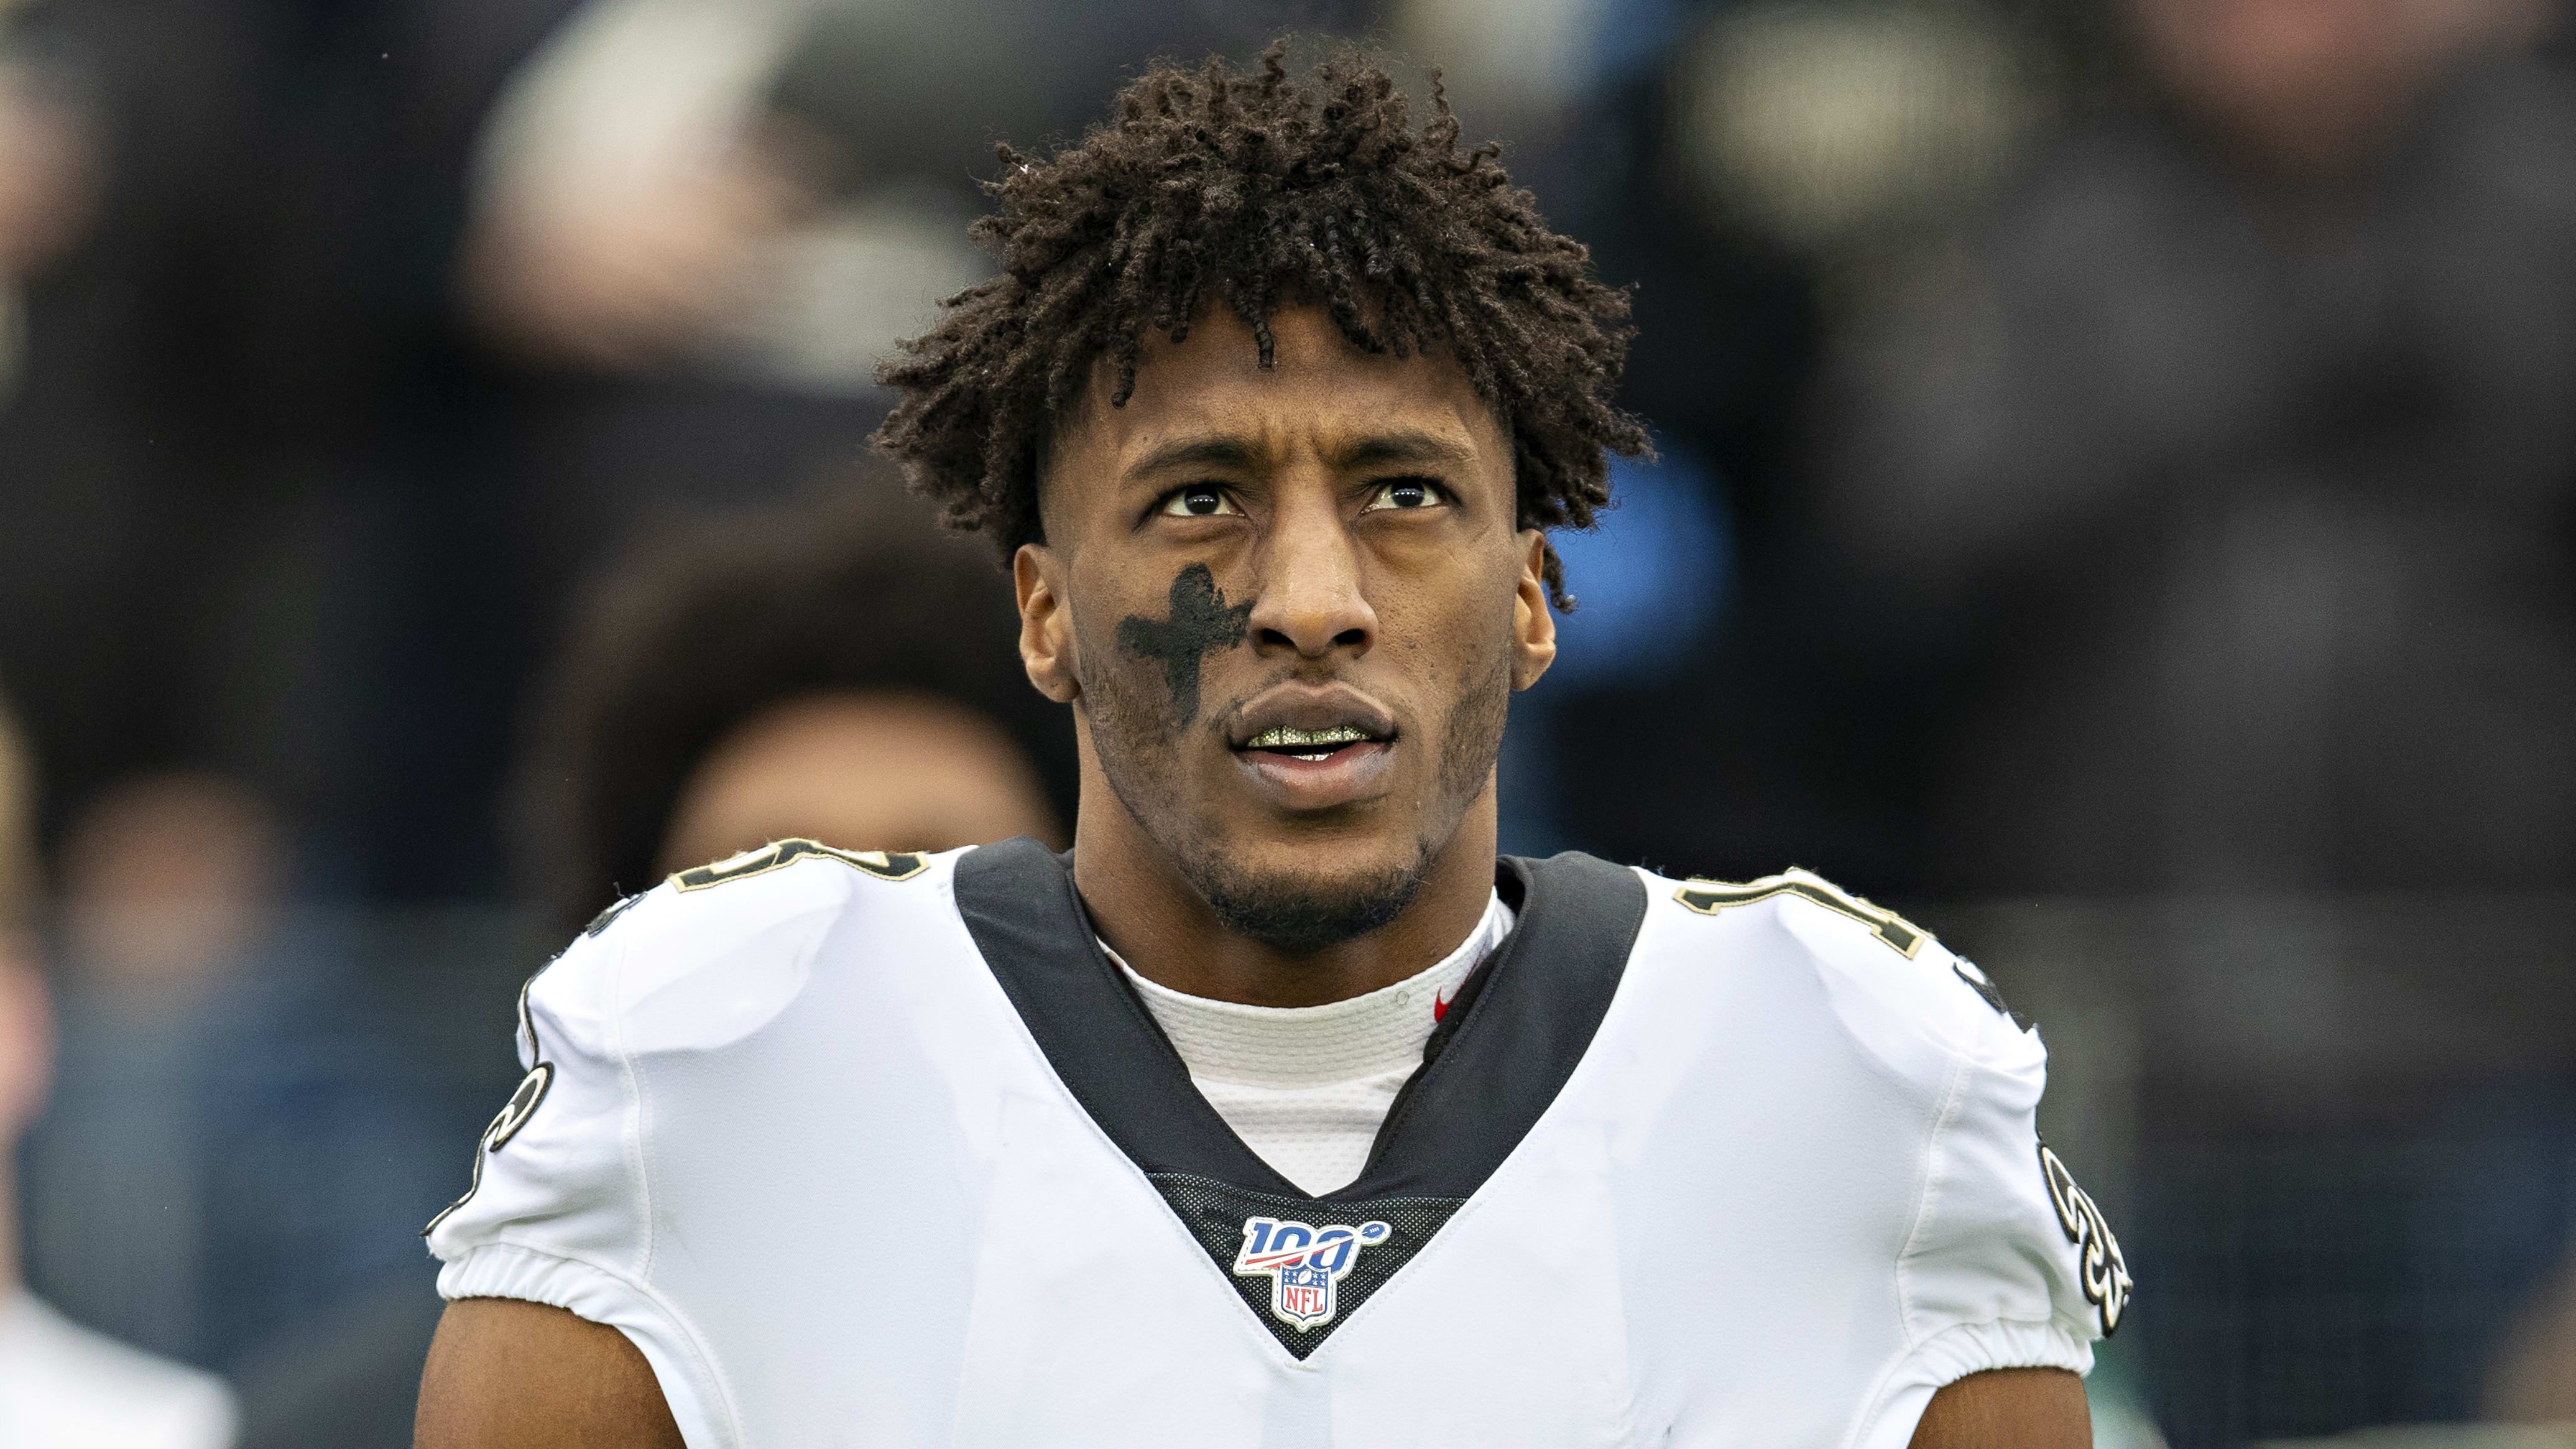 Details of What Led to Michael Thomas Ankle Surgery Are Troubling